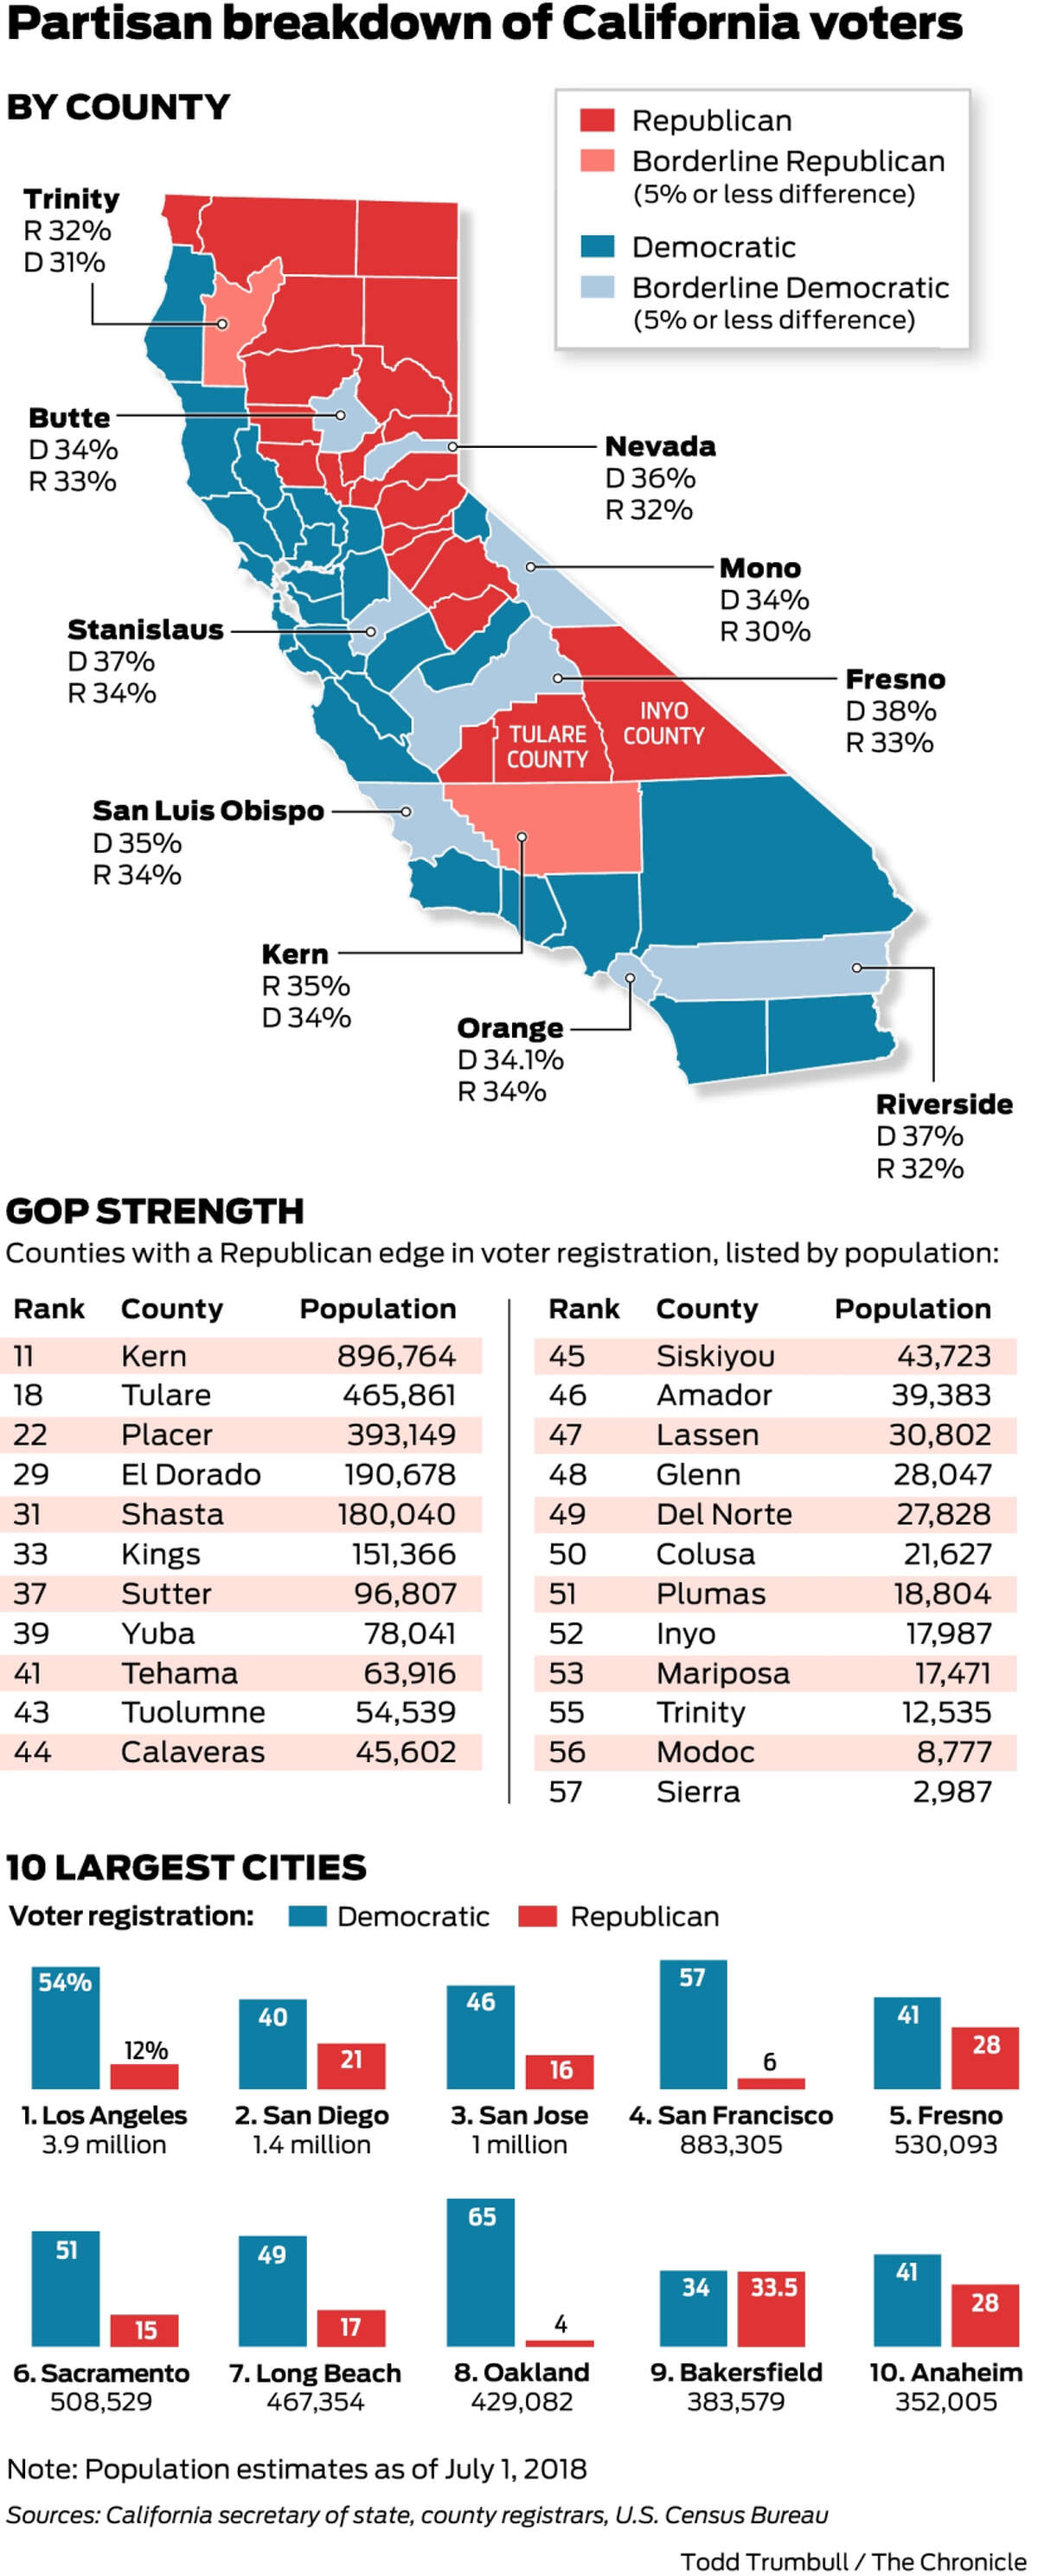 How isolated are California Republicans? Let’s go to the map